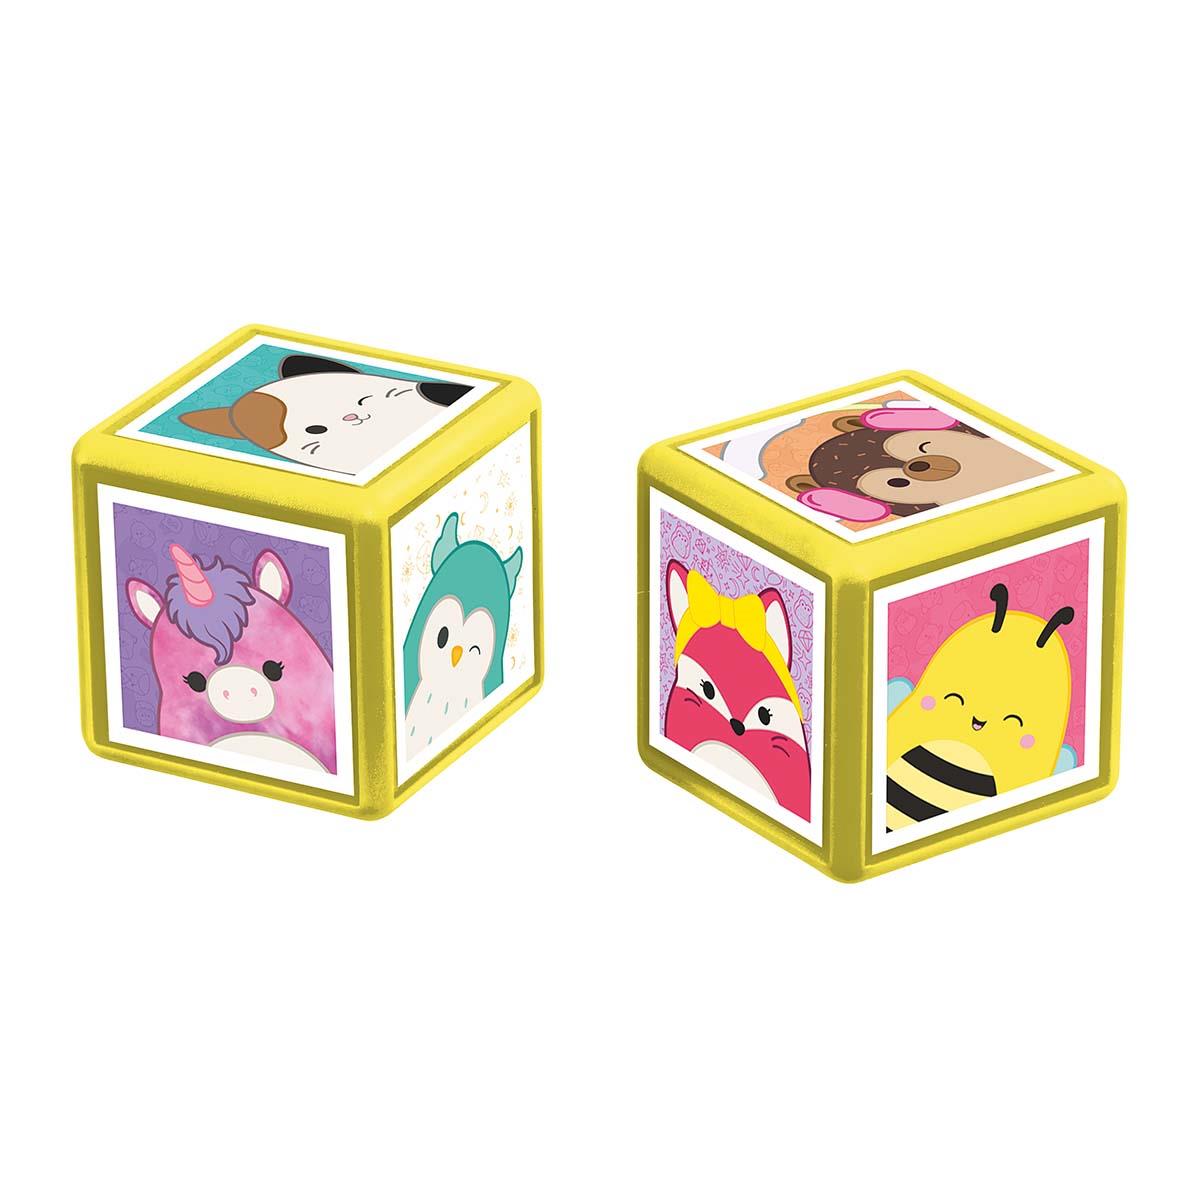 Squishmallows Top Trumps Match - The Crazy Cube Game